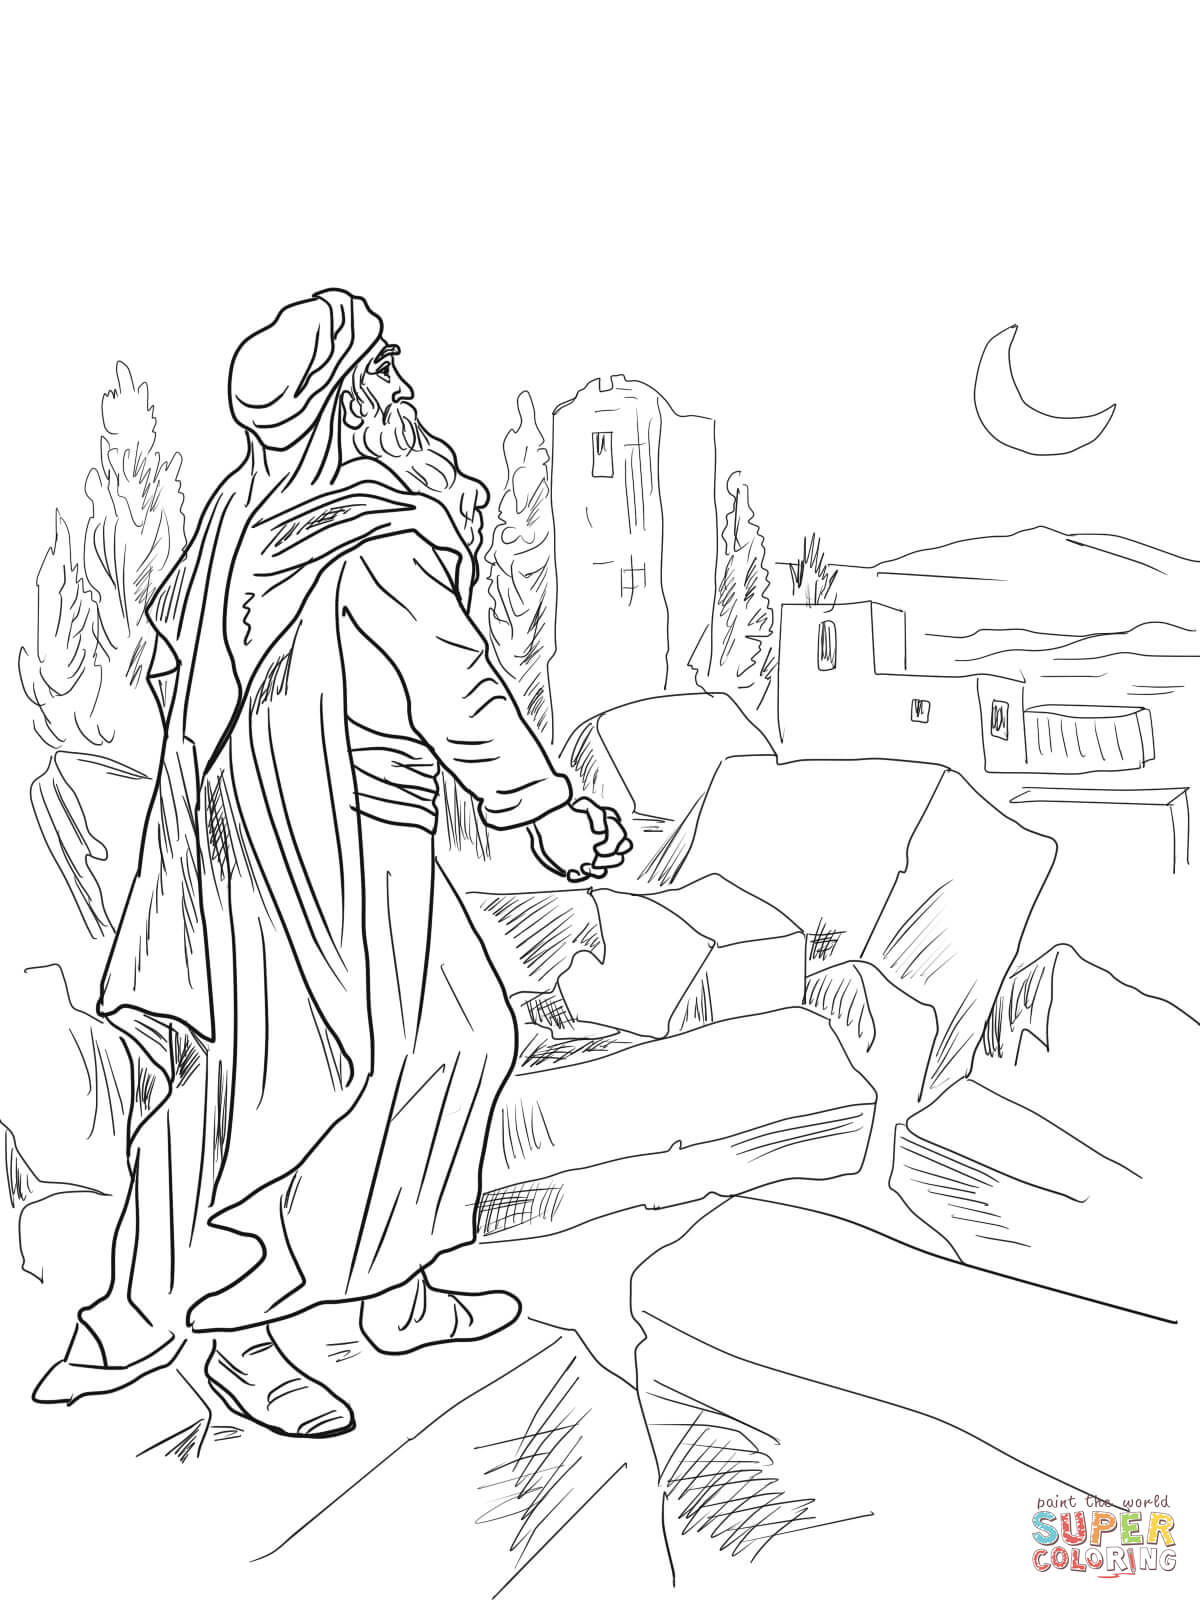 Nehemiah observing broken walls of jerusalem coloring page free printable coloring pages